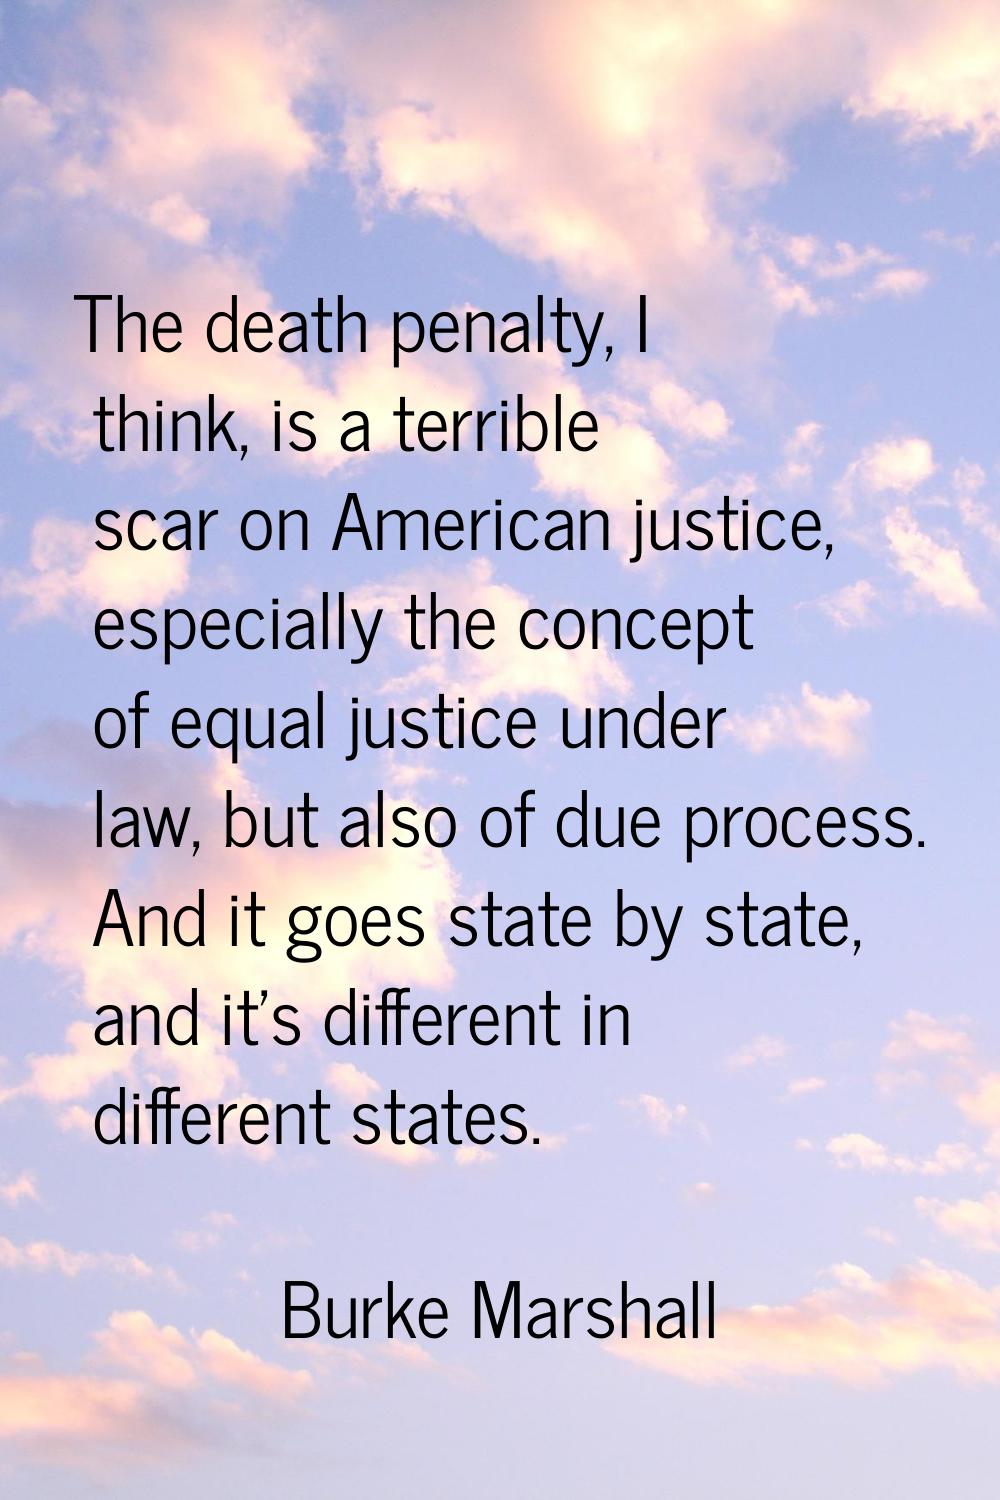 The death penalty, I think, is a terrible scar on American justice, especially the concept of equal